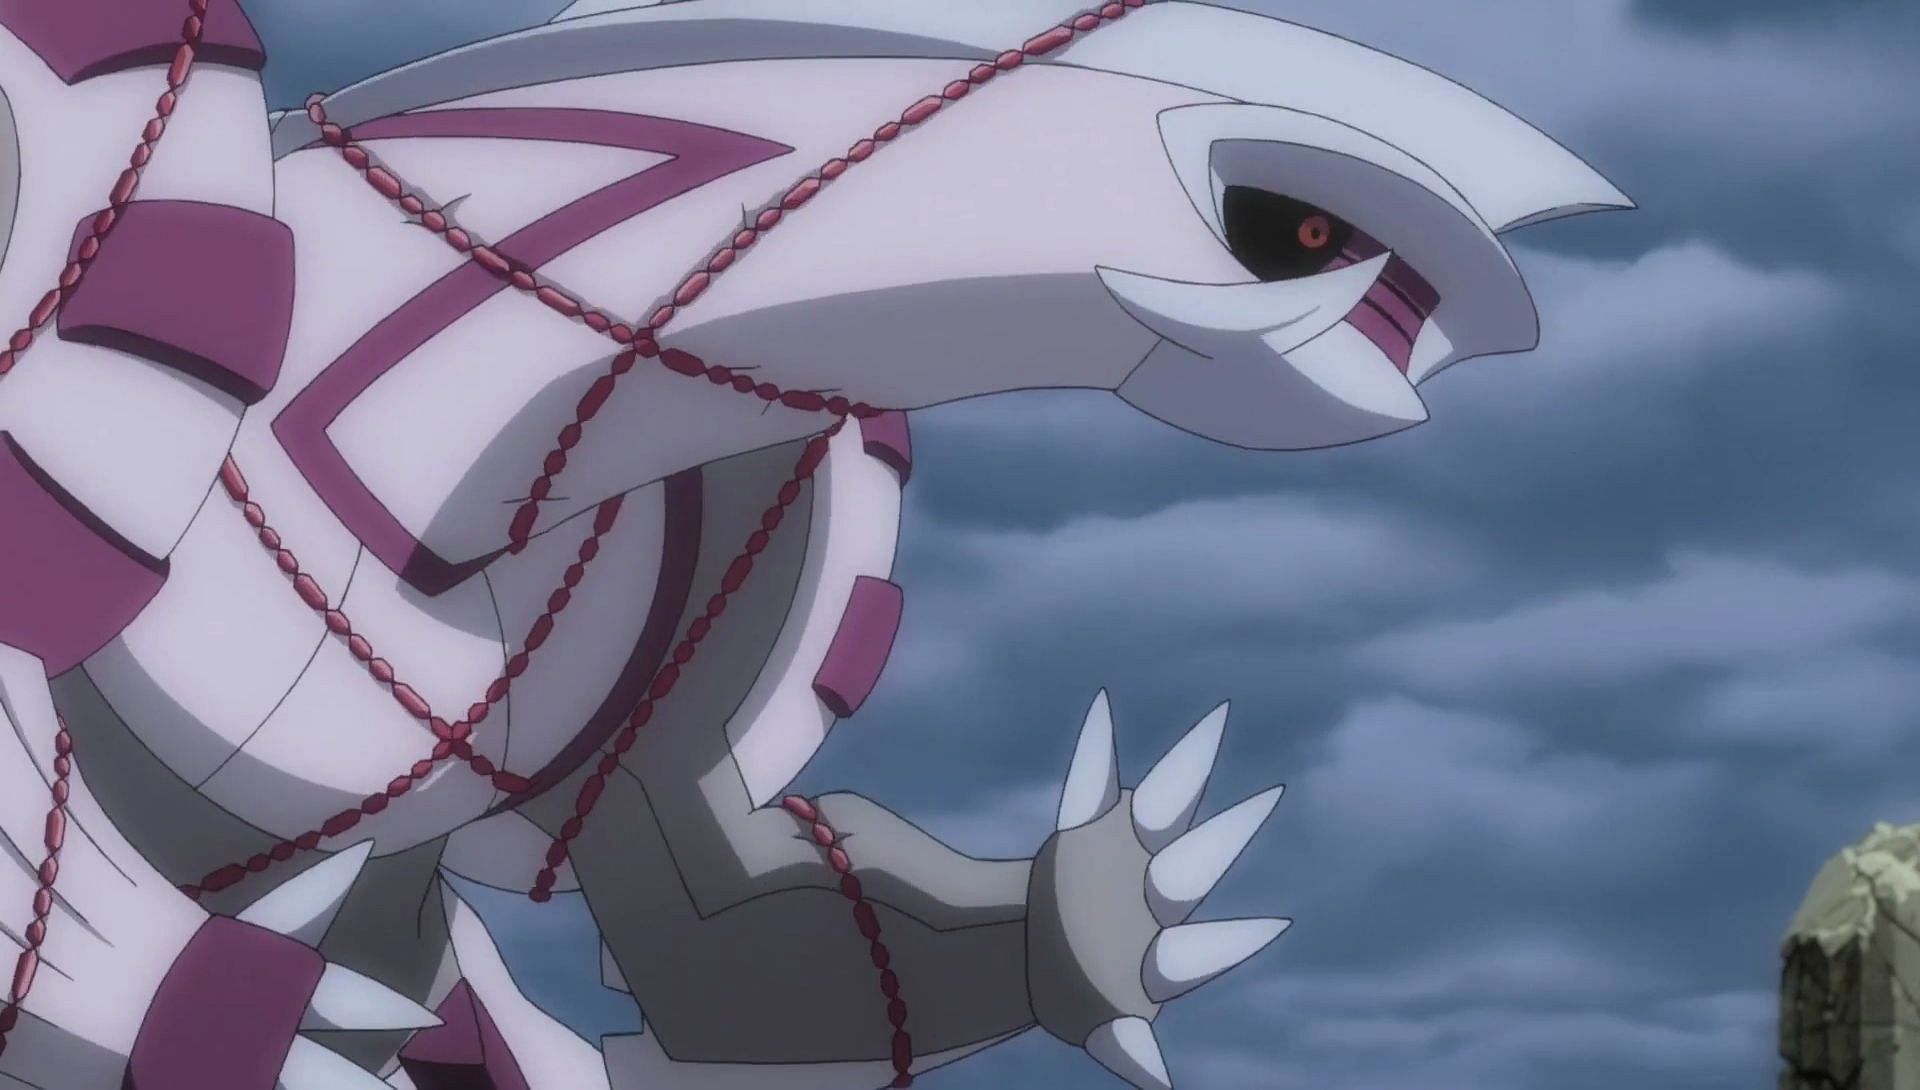 Palkia as it appears in the anime (Image via The Pokemon Company)